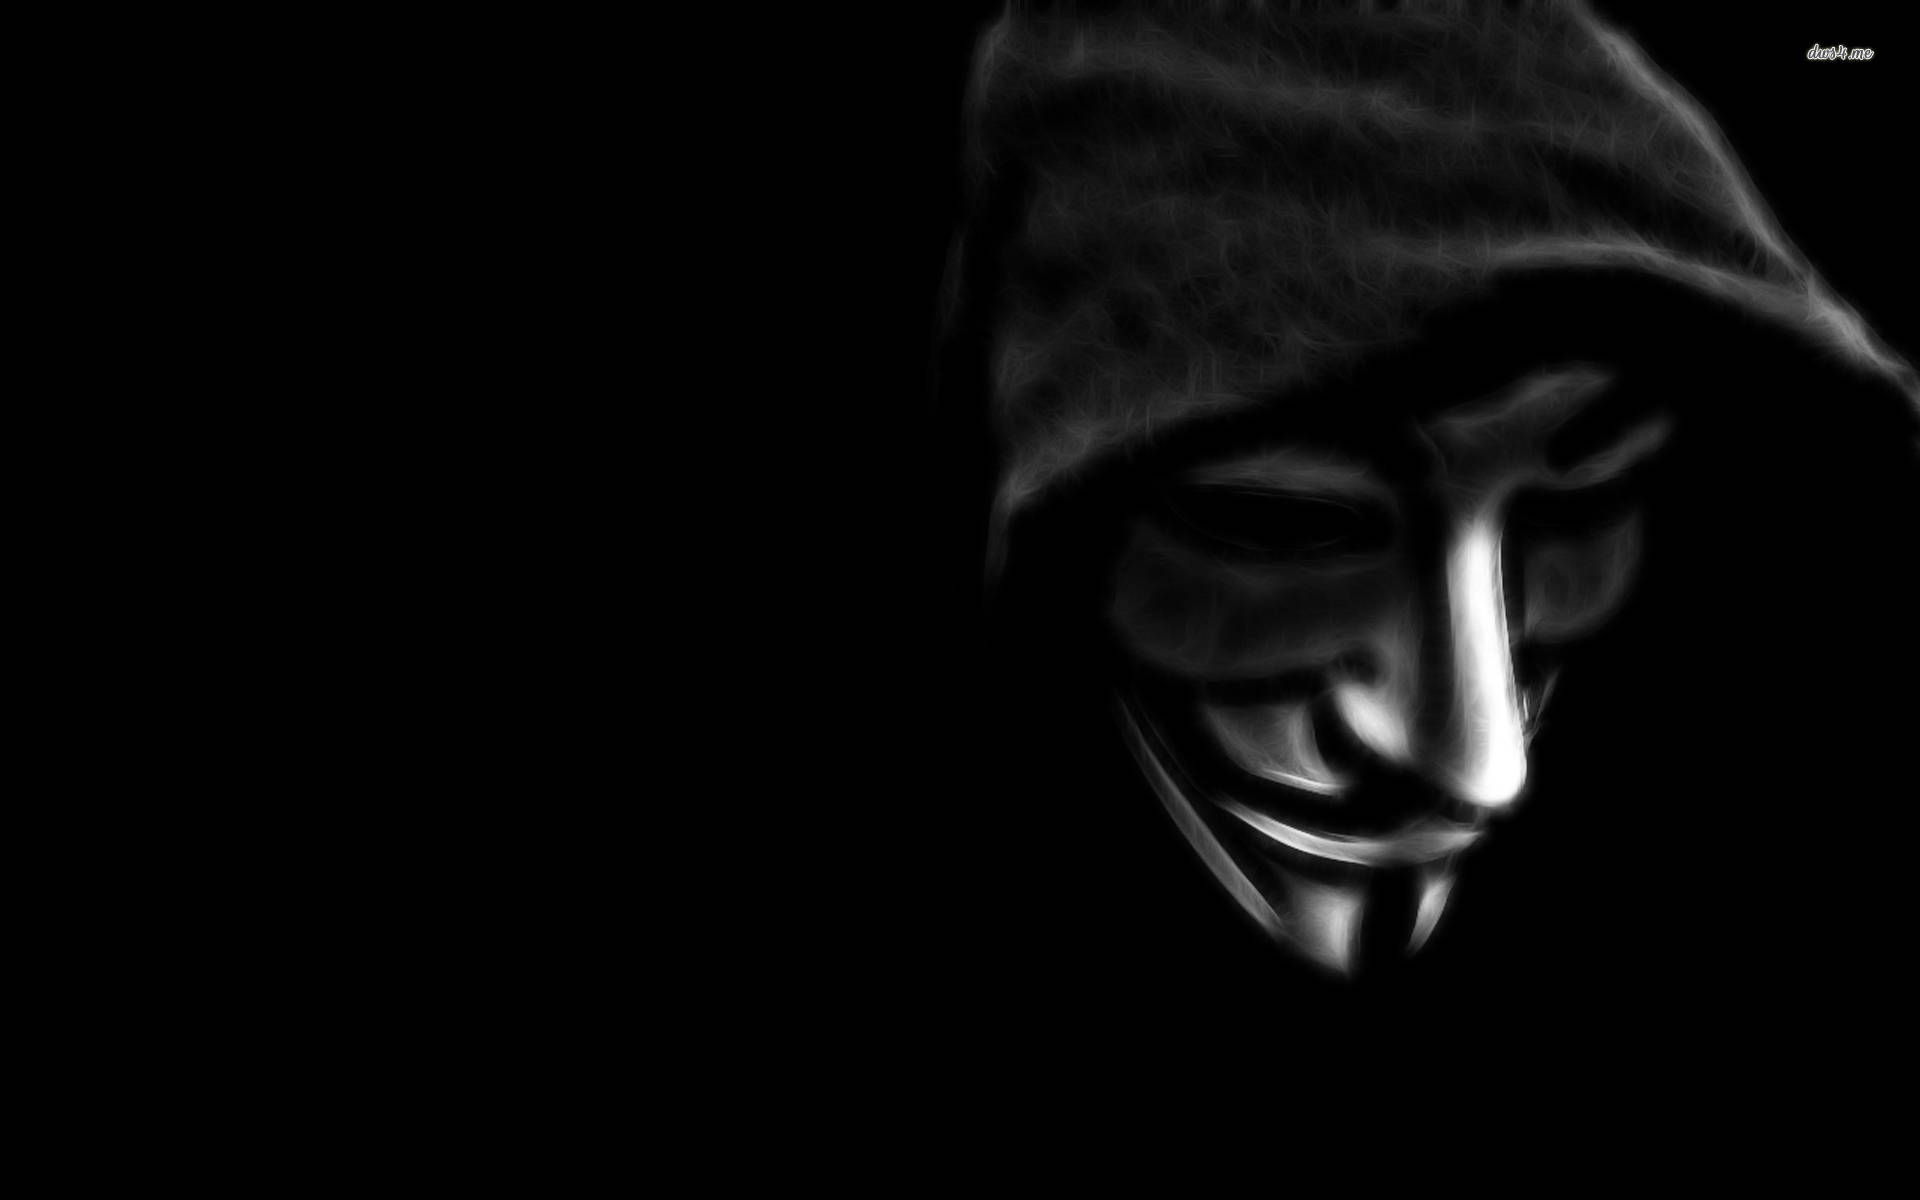 Free Anonymous Wallpaper Downloads, [200+] Anonymous Wallpapers for FREE |  